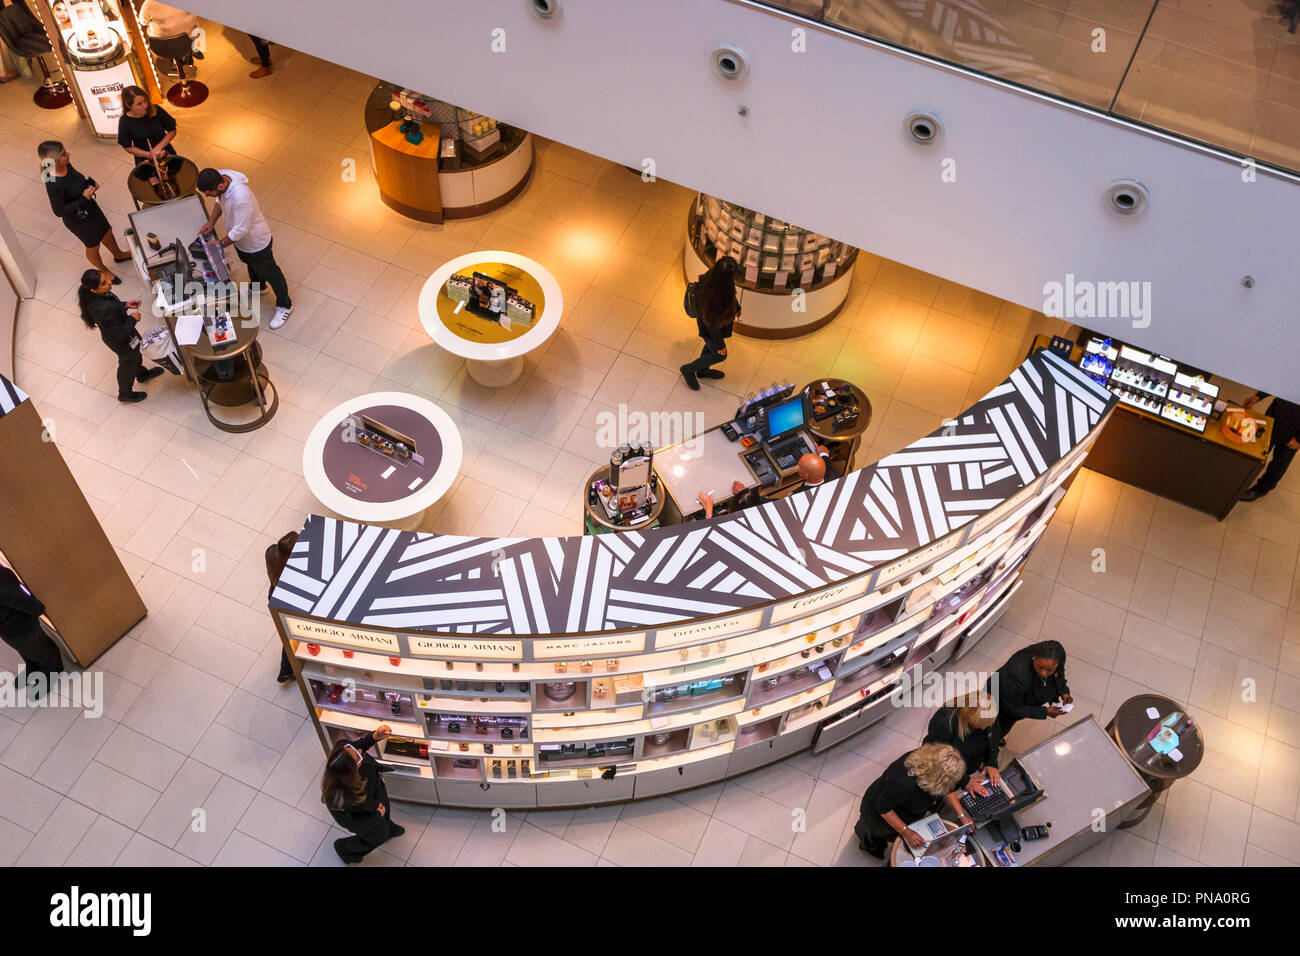 Displays of luxury goods and perfumes viewed from above in the iconic flagship Oxford Street John Lewis & Partners retail department store, London W1 Stock Photo